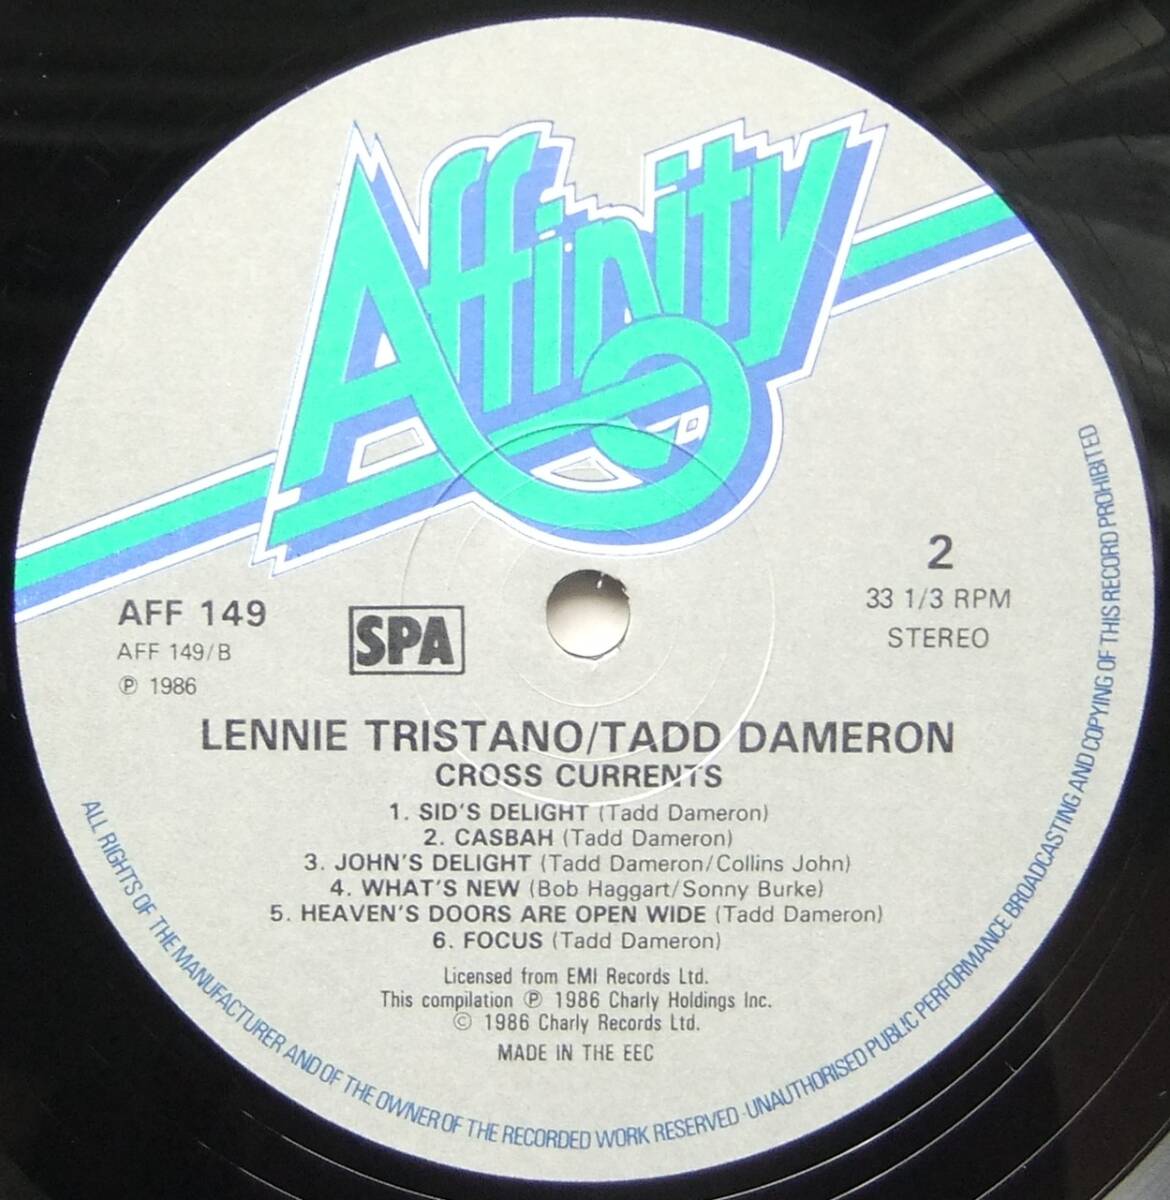 ◆ LENNIE TRISTANO - TADD DAMERON / Crosscurrents ◆ Affinity AFF 149 (England) ◆_画像4